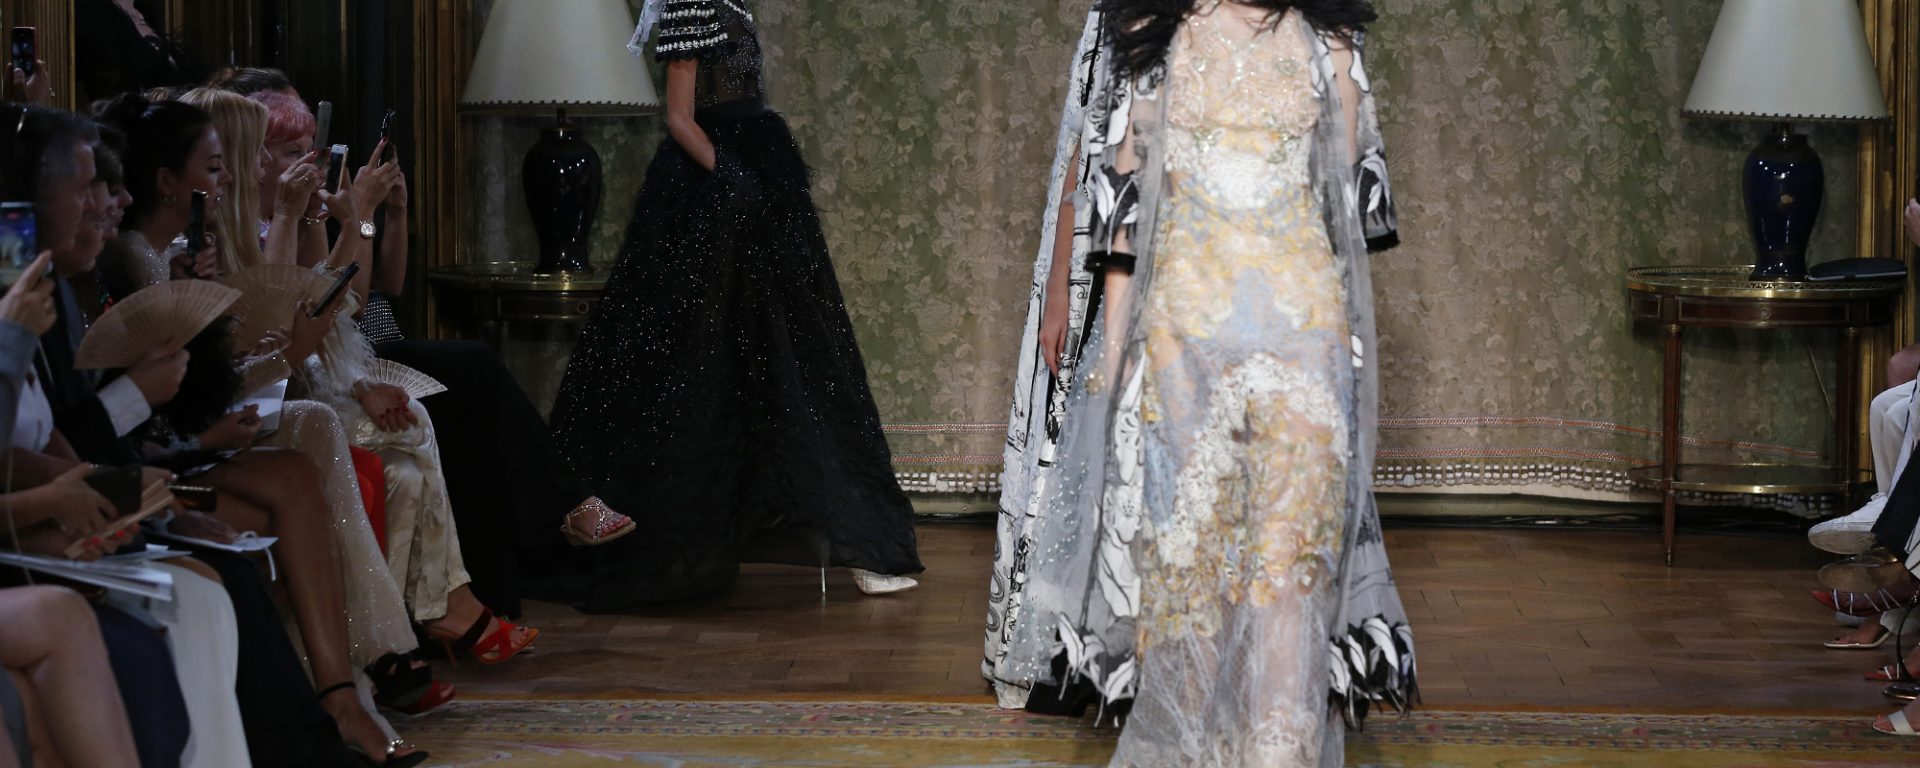 The Haute Couture Fashion Week goes on-line for the first time